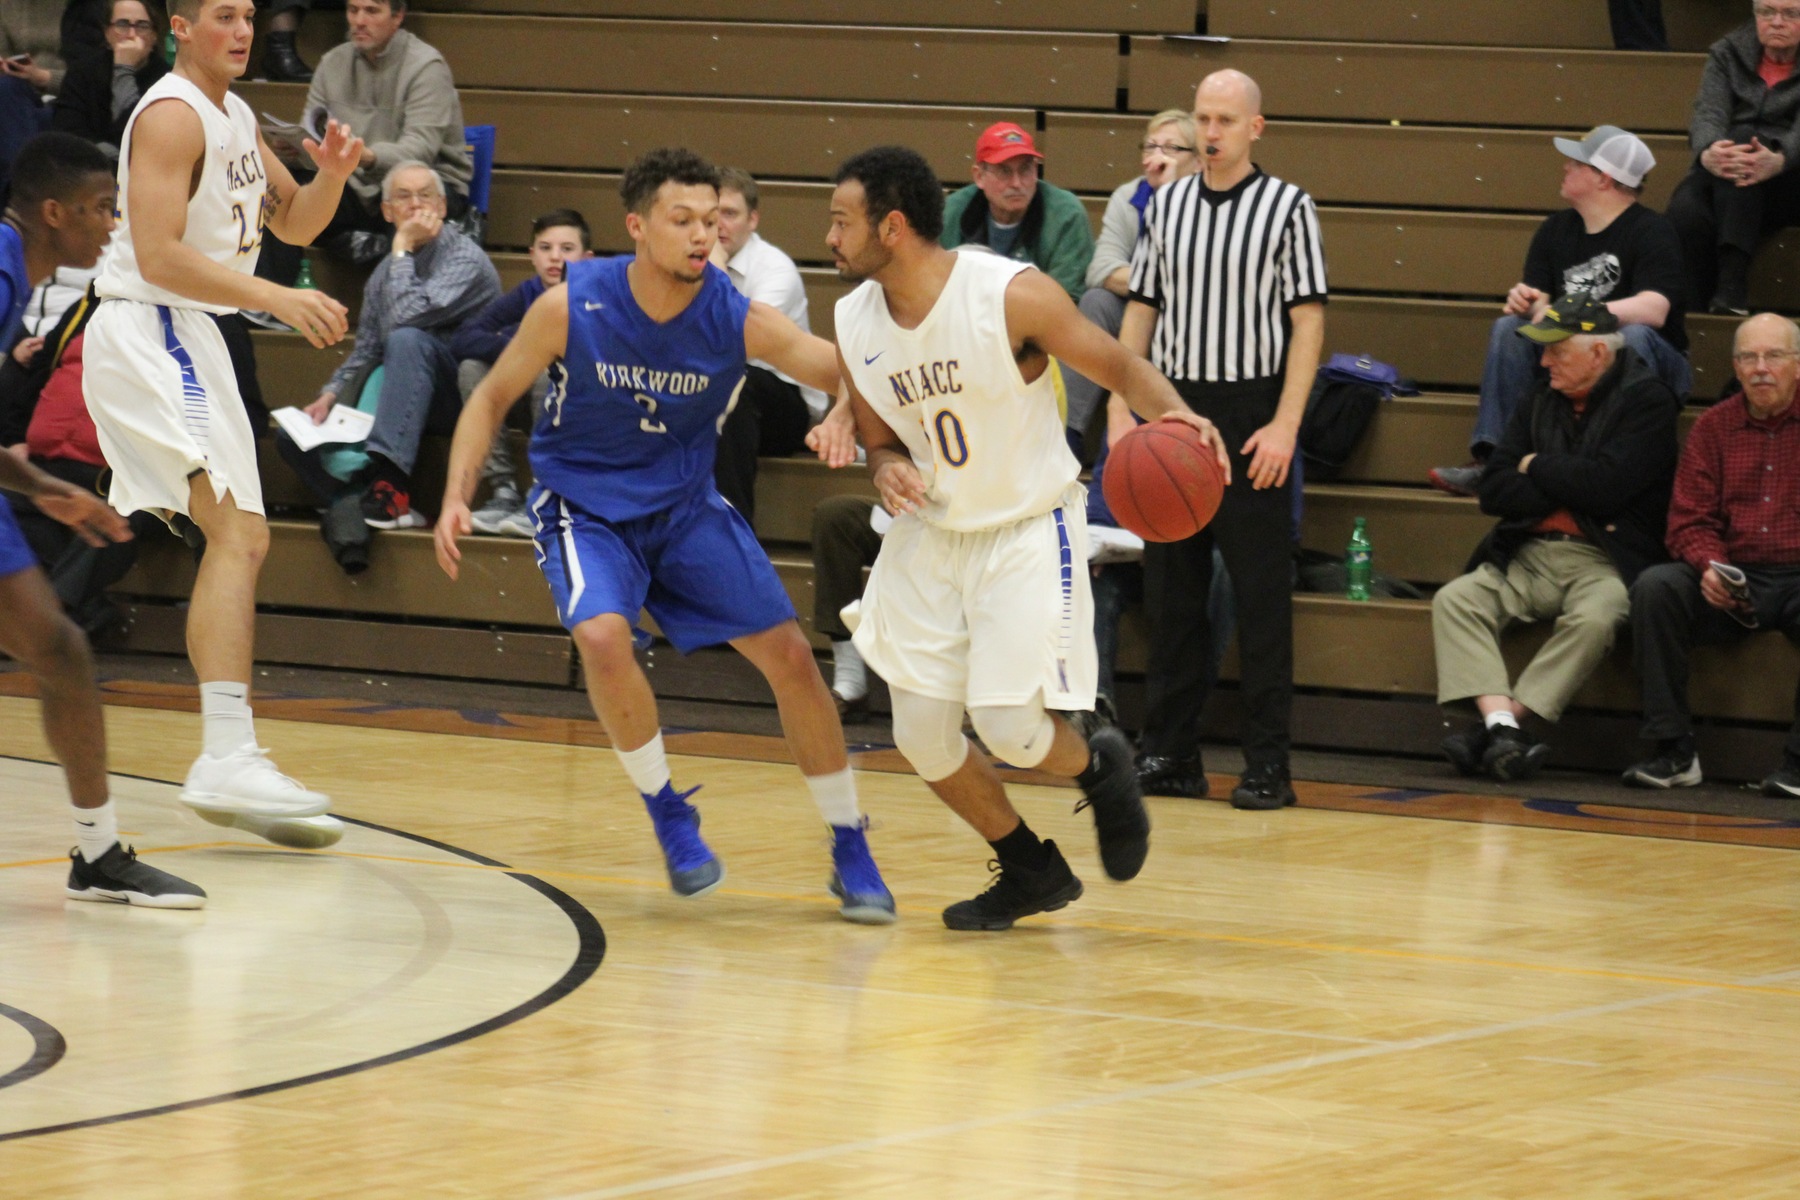 NIACC's Rodrick Fuller looks to drive during Wednesday's game against Kirkwood.